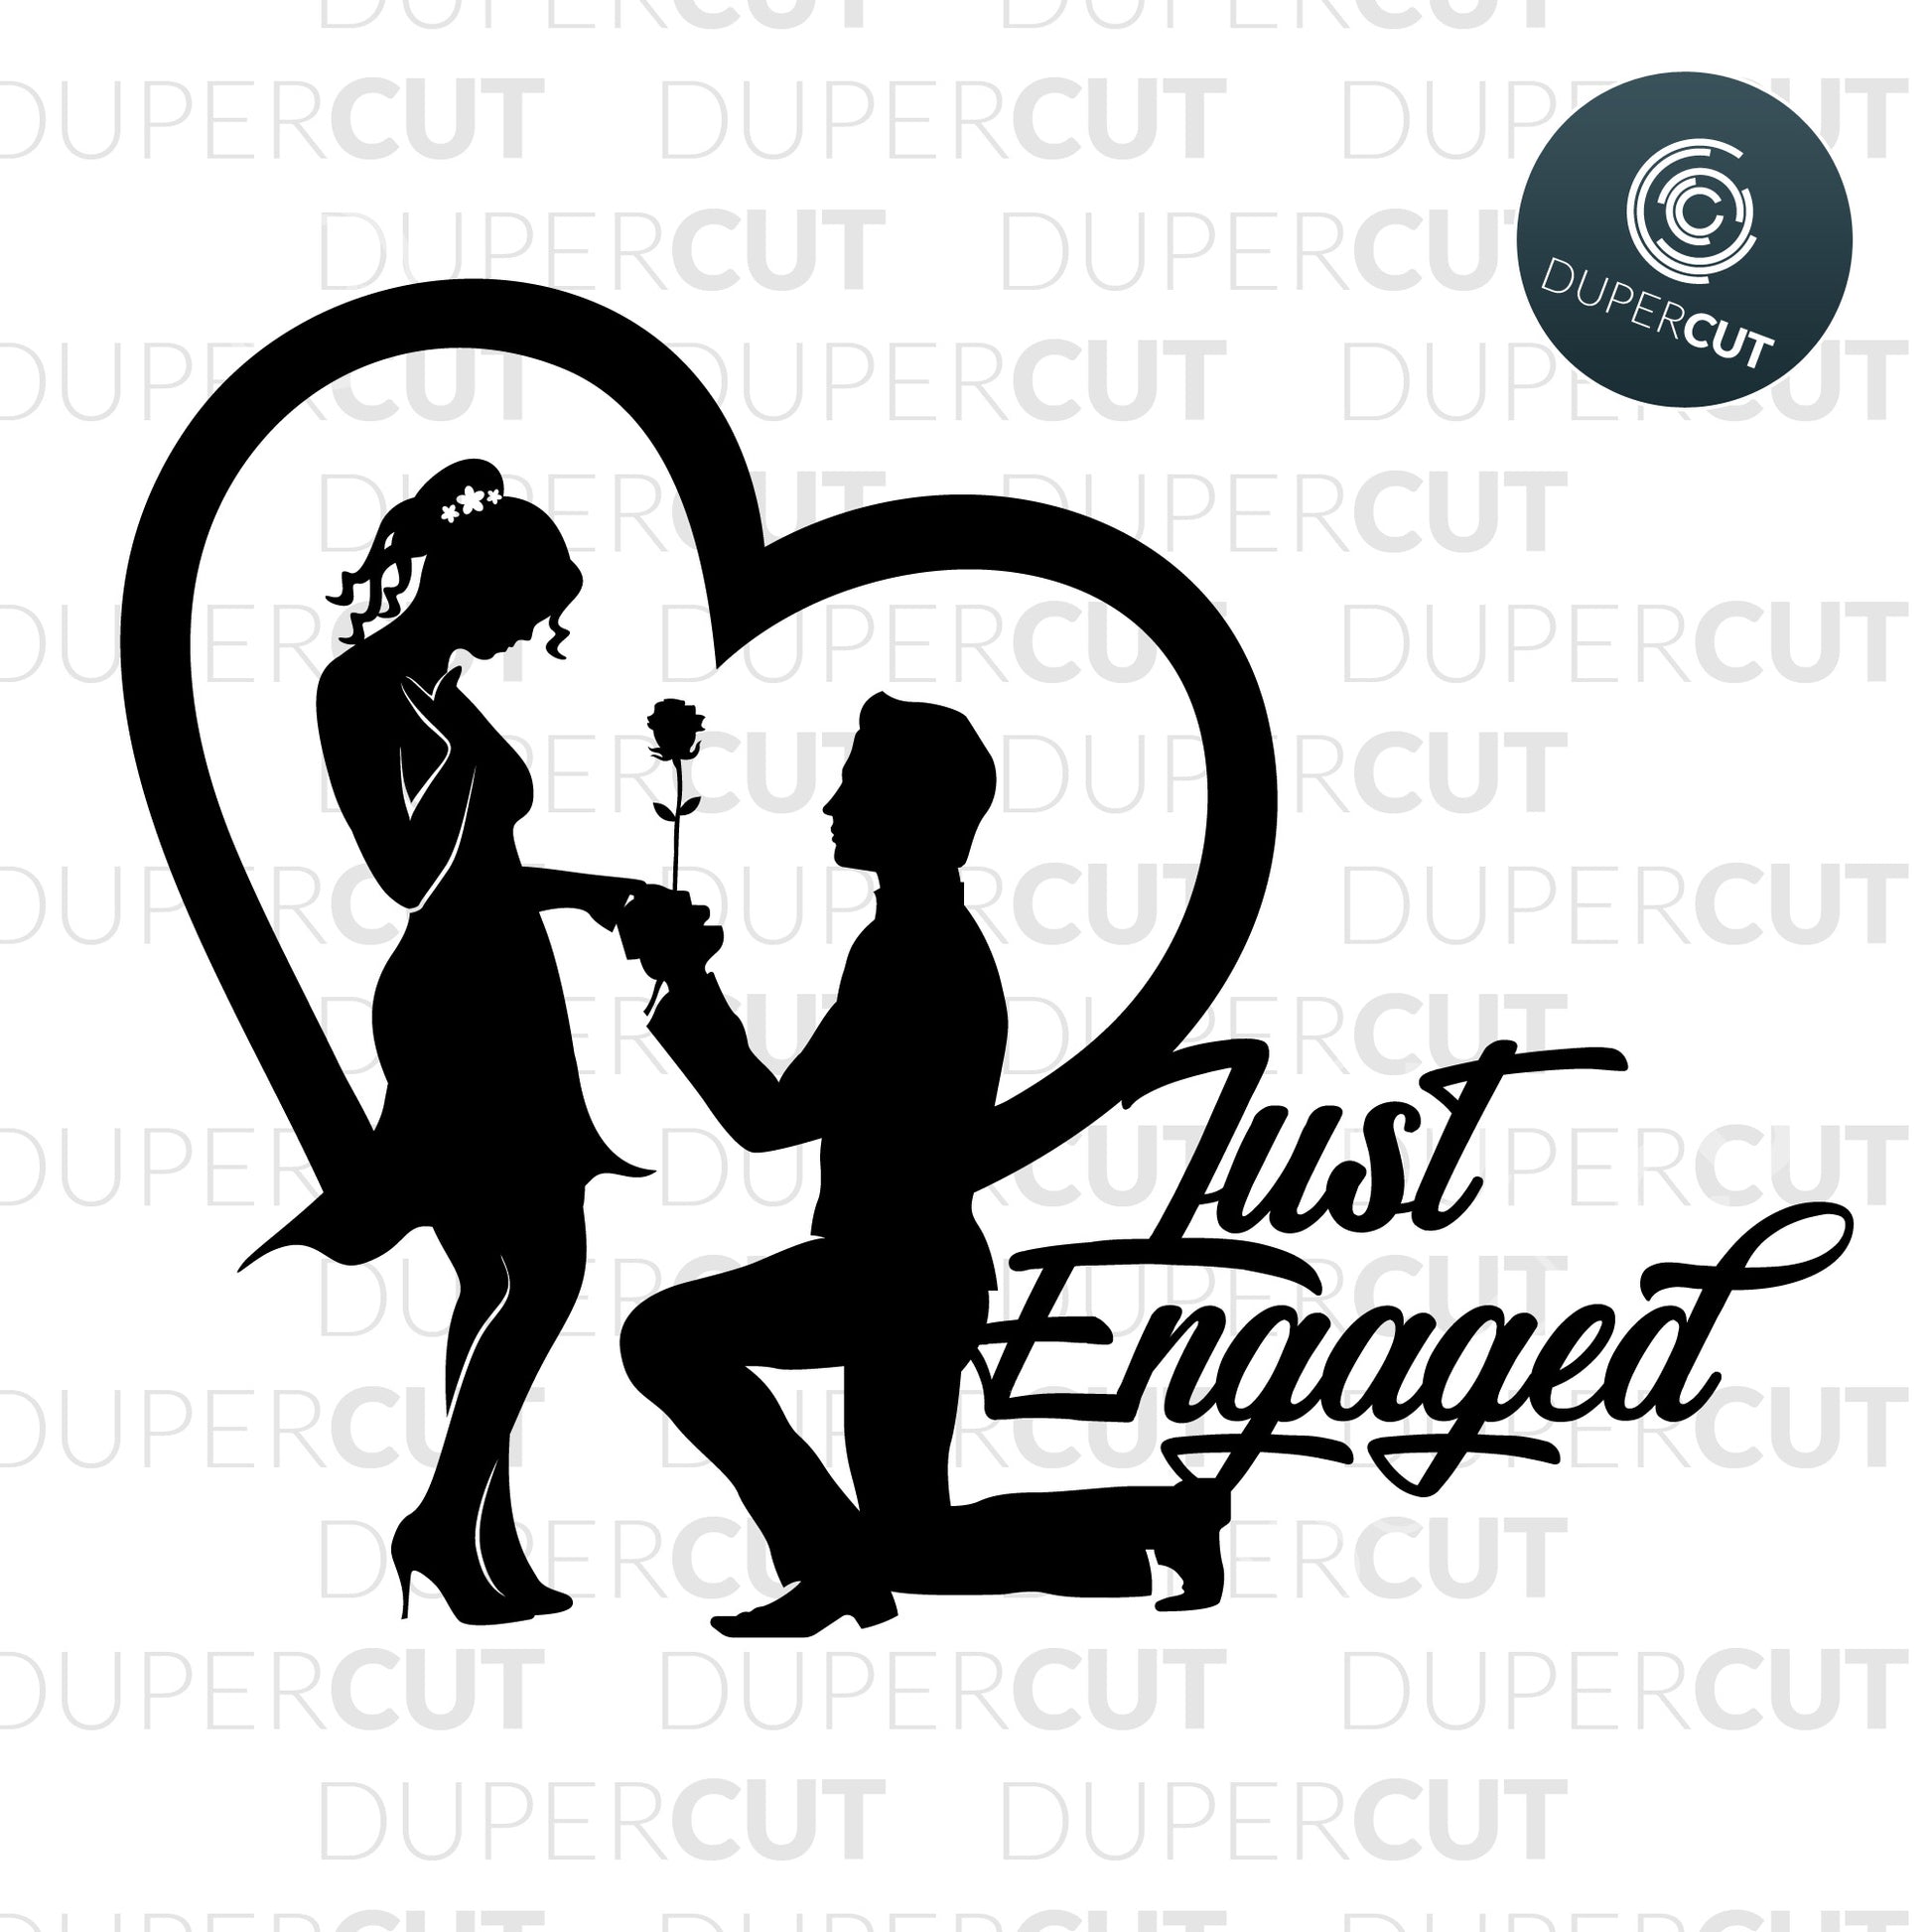 Cake topper Just engaged, Wedding proposal. Papercutting template for commercial use. SVG files for Silhouette Cameo, Cricut, Glowforge, DXF for CNC, laser cutting, print on demand